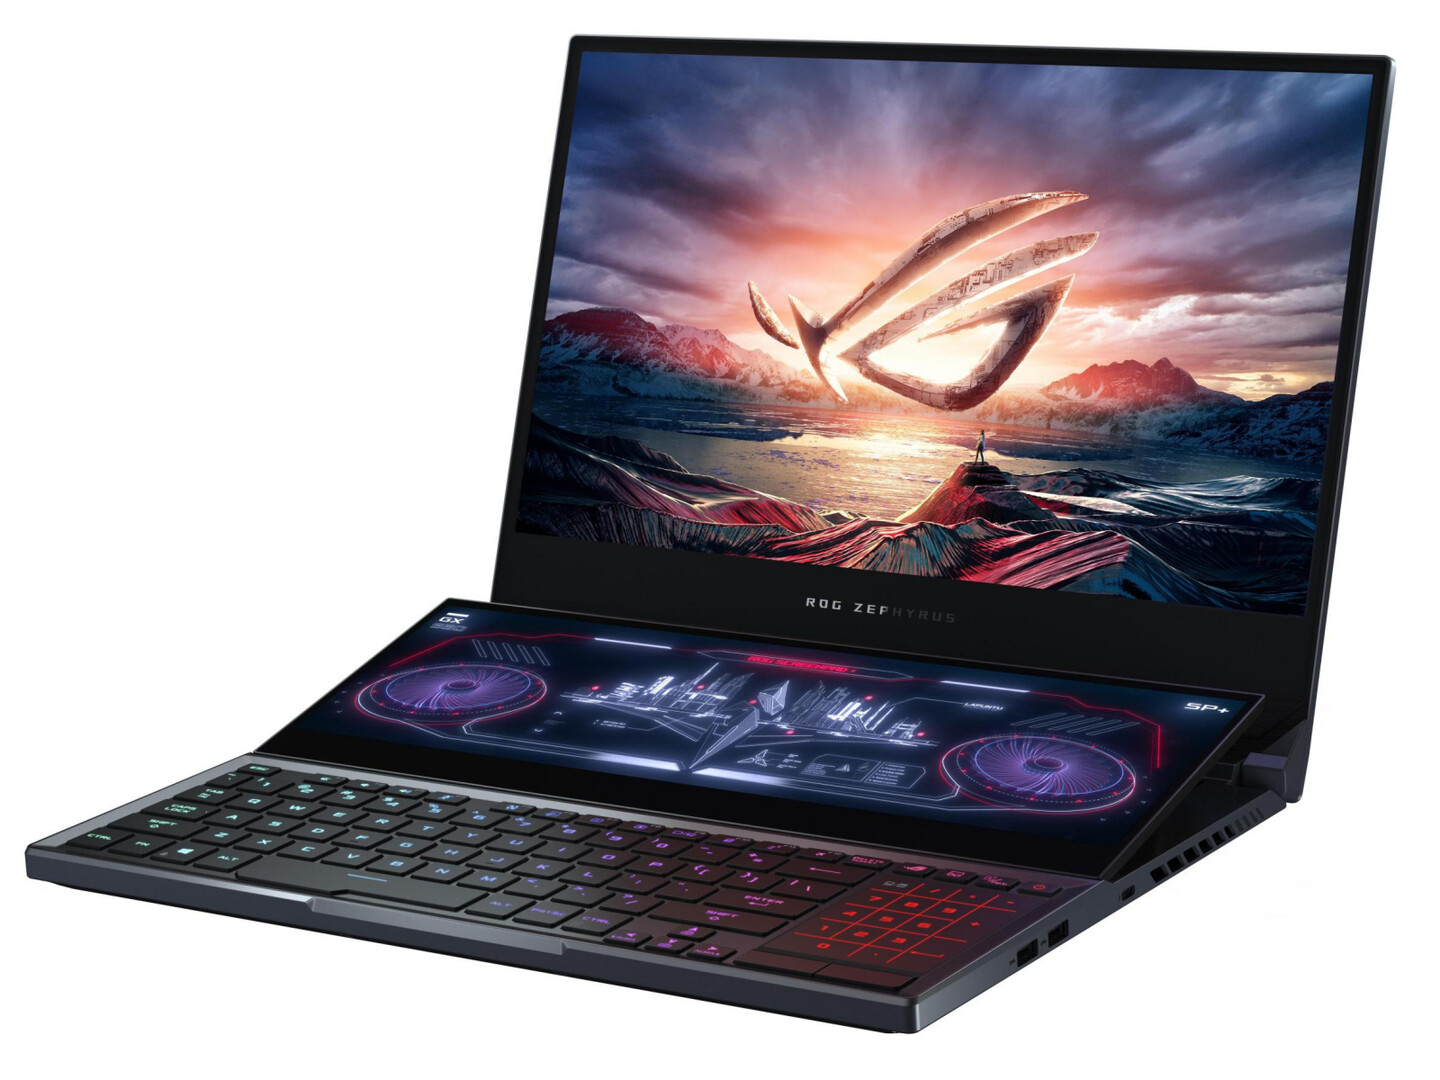 Asus ROG Zephyrus Duo GX551QS with Ryzen 9 5900H and RTX 3080 Mobile